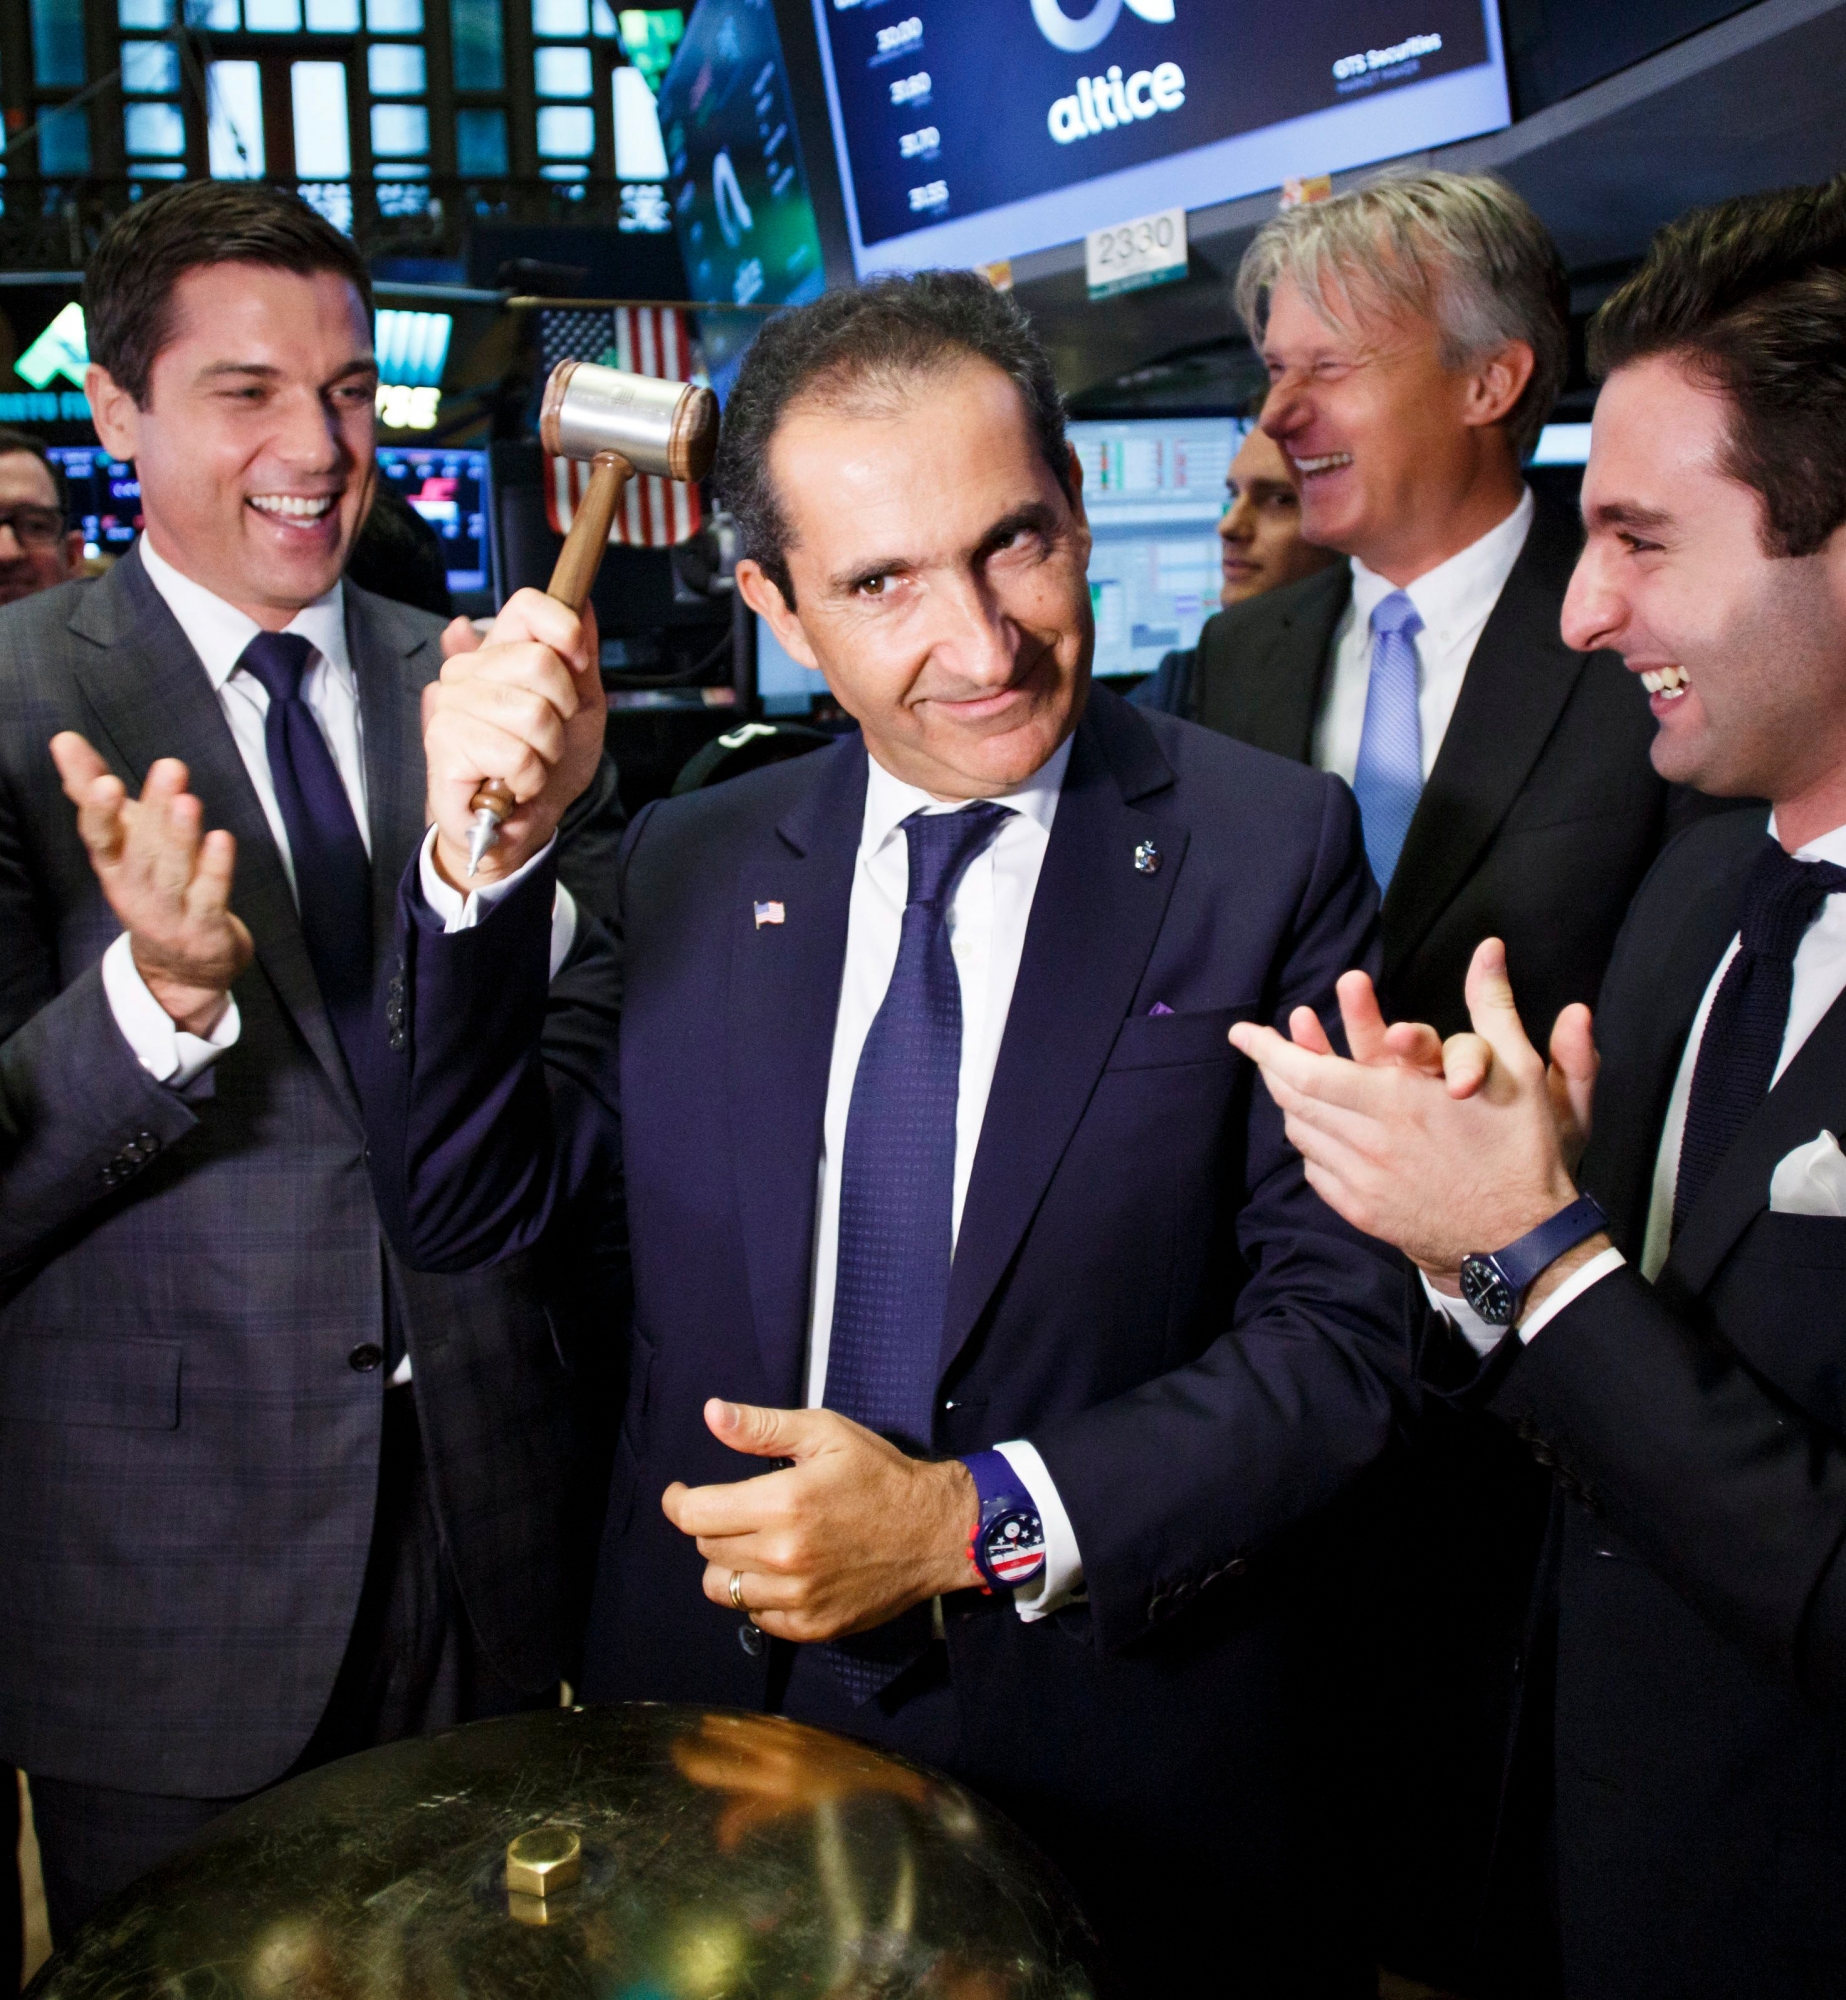 epa06043671 Patrick Drahi (C), the founder of Altice, pretends to hit himself in the head with a mallet after ringing a ceremonial bell during the initial public offering of Altice USA, a cable and telecommunications company, while standing with Thomas W. Farley (L), the President of the NYSE, and other members of the company's leadership on the floor of the New York Stock Exchange in New York, New York, USA, 22 June 2017. The company raised an estimated 1.9 billion dollars with the initial public offering.  EPA/JUSTIN LANE USA NEW YORK ALTICE IPO AT NYSE